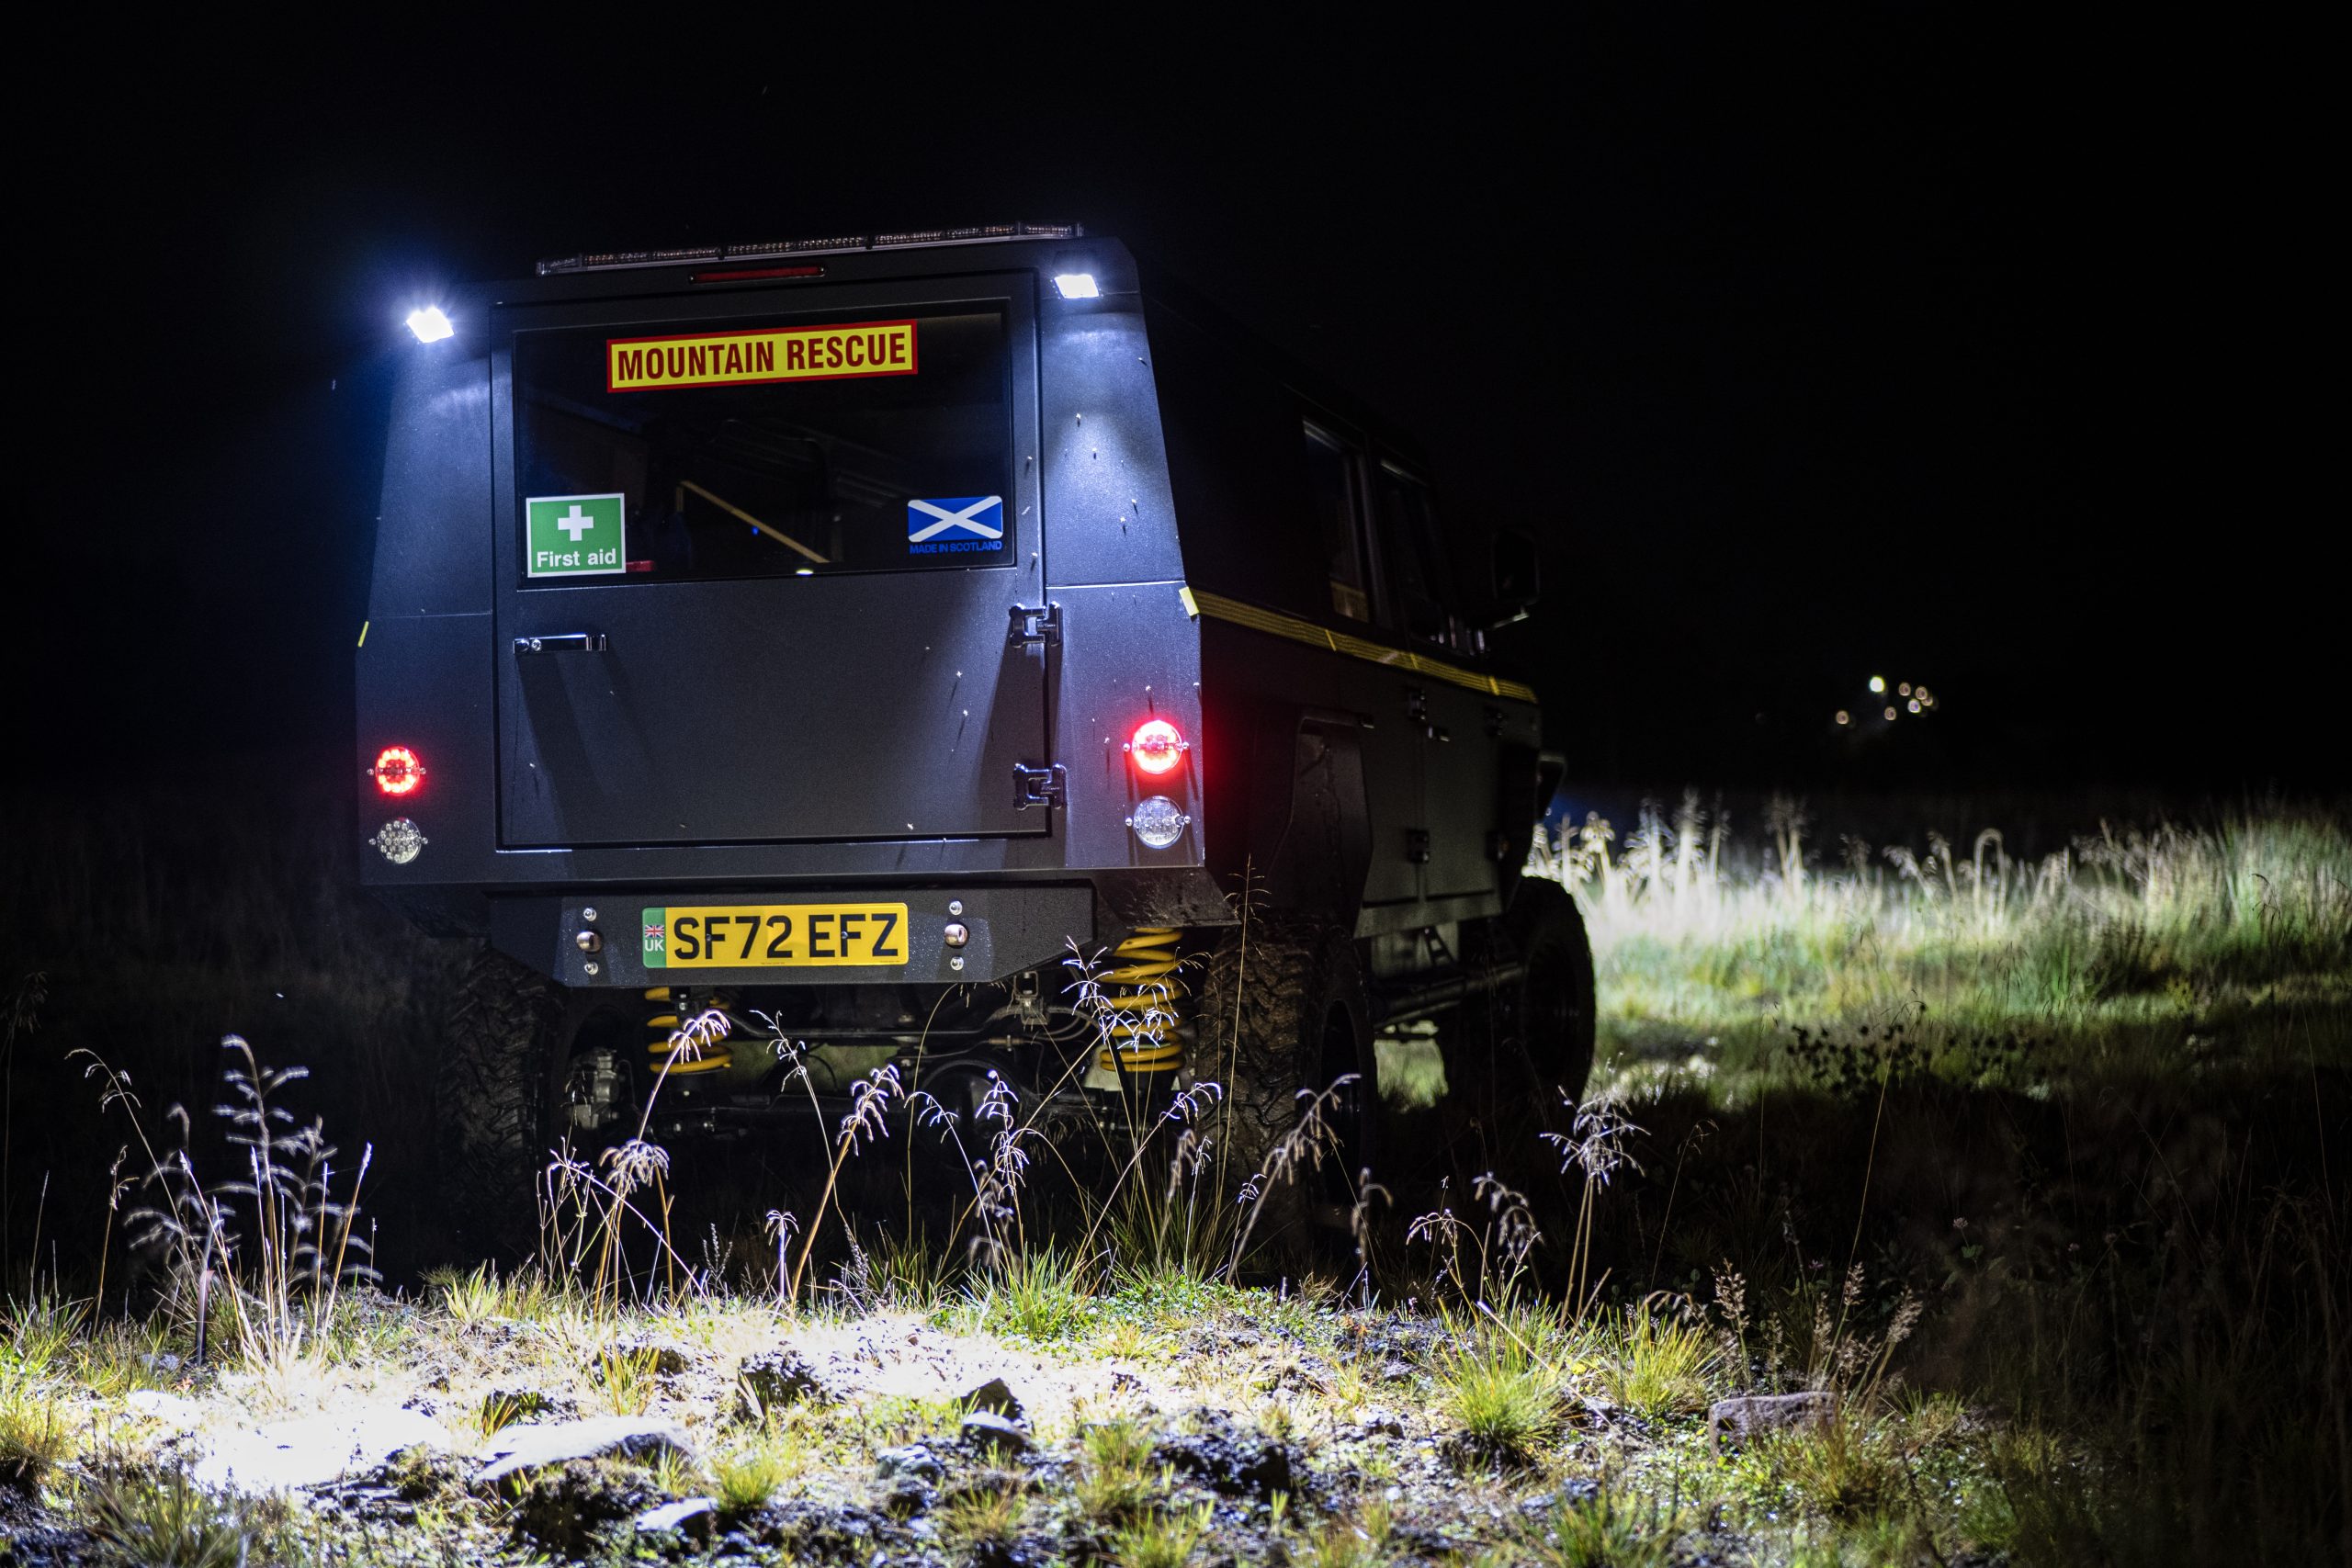 https://e-vehicleinfo.com/global/munro-unveils-mk-1-mountain-rescue-edition-electric-truck/